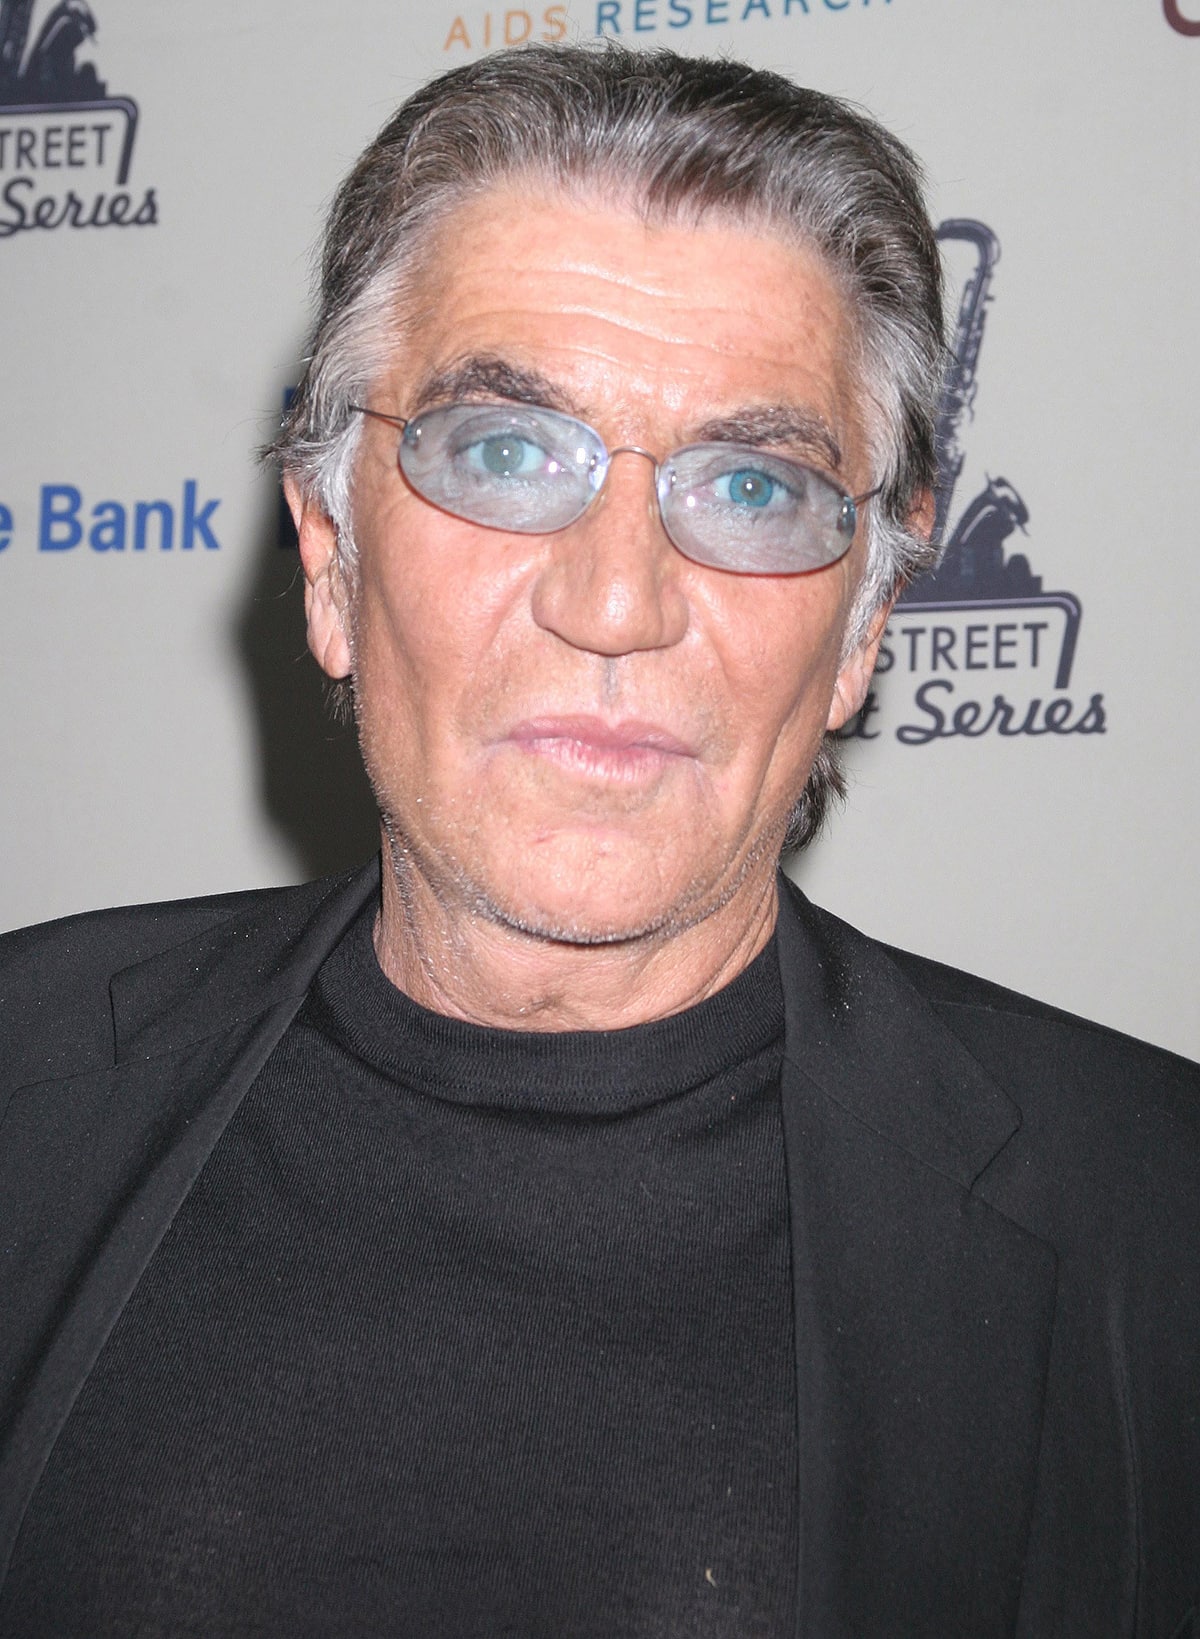 Roberto Cavalli is an Italian fashion designer and inventor of a revolutionary leather printing procedure that led to him working with Pierre Cardin and Hermes